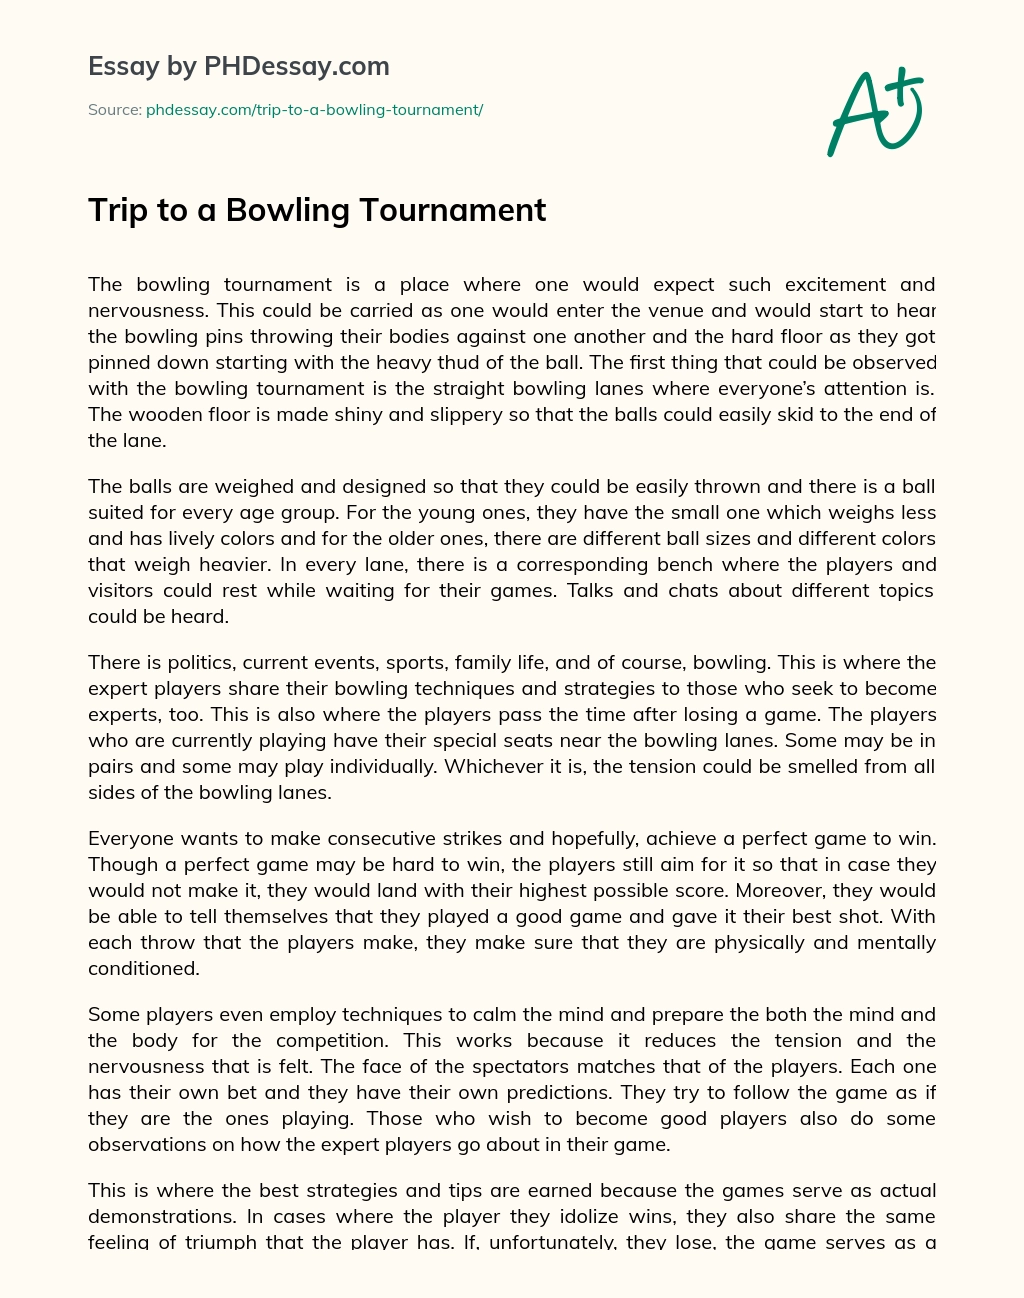 essay about playing bowling